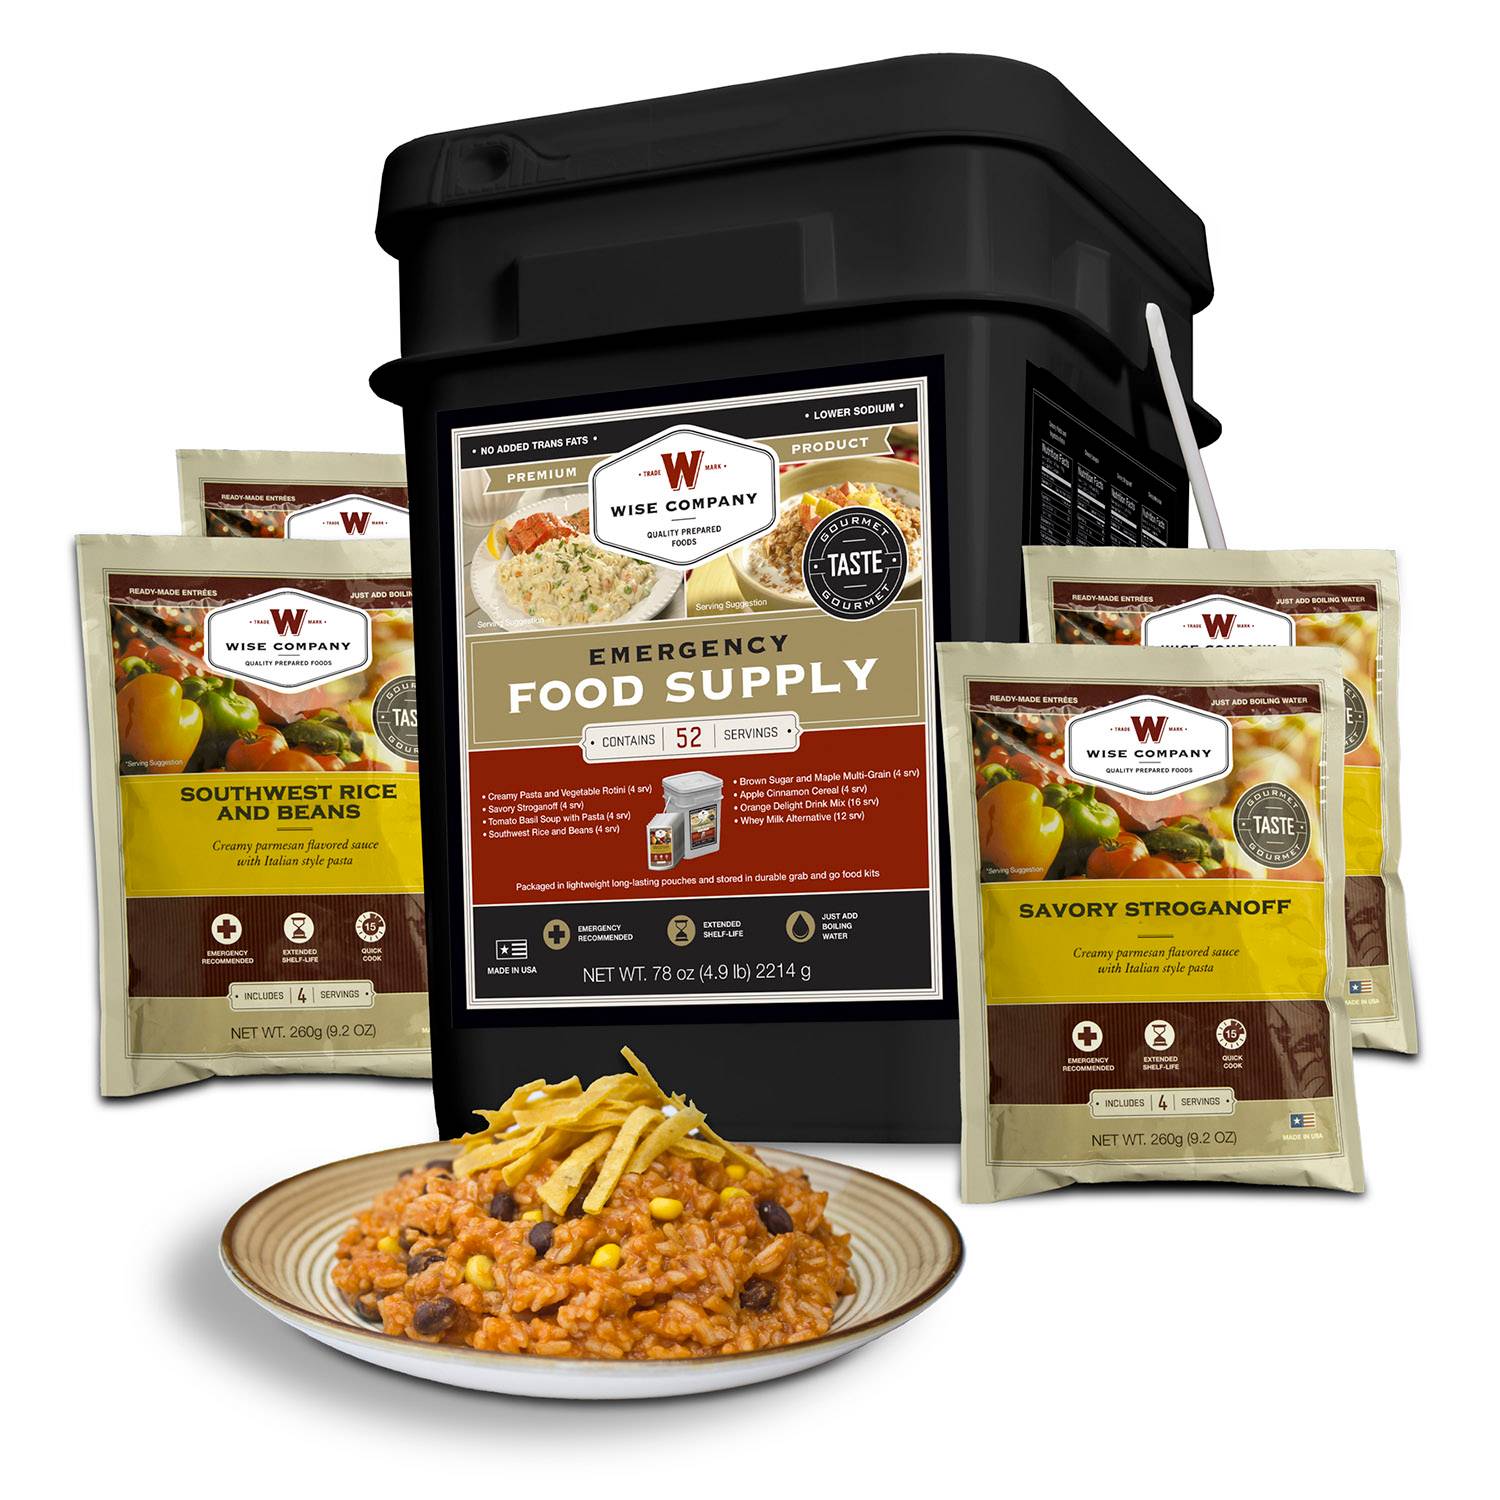 Wise Company Emergency Food Supply Prepper Pack